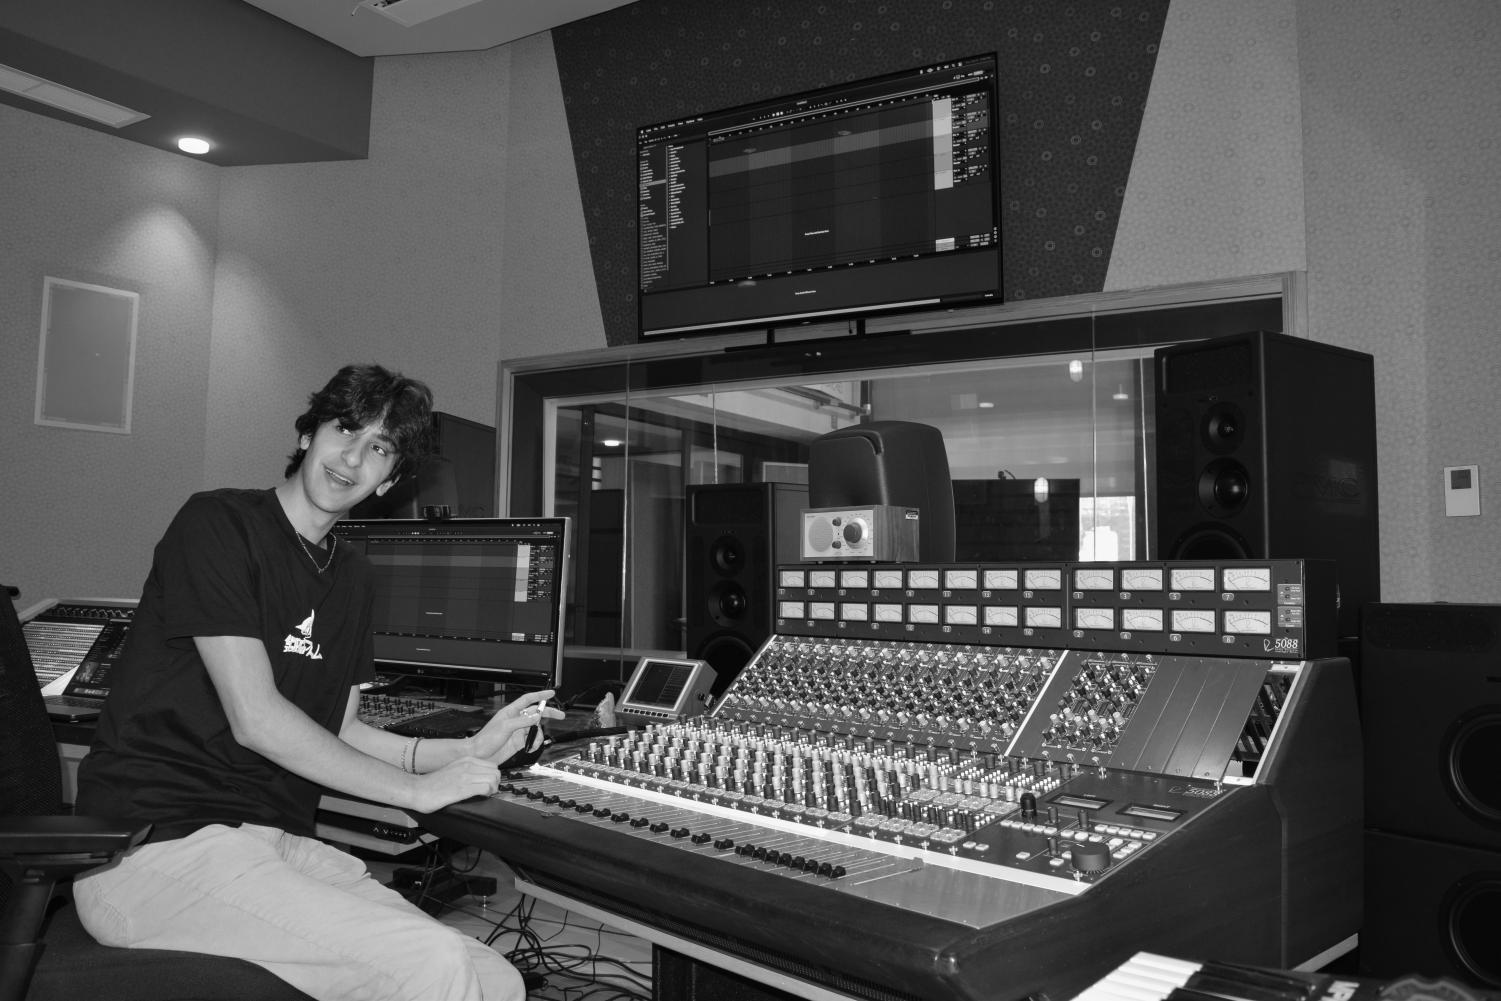 A black-and-white image of a male college student with floppy dark hair wearing a black t-shirt with an unclear logo, light pants, and a small necklace sitting in a chair facing music controls inside a recording studio.